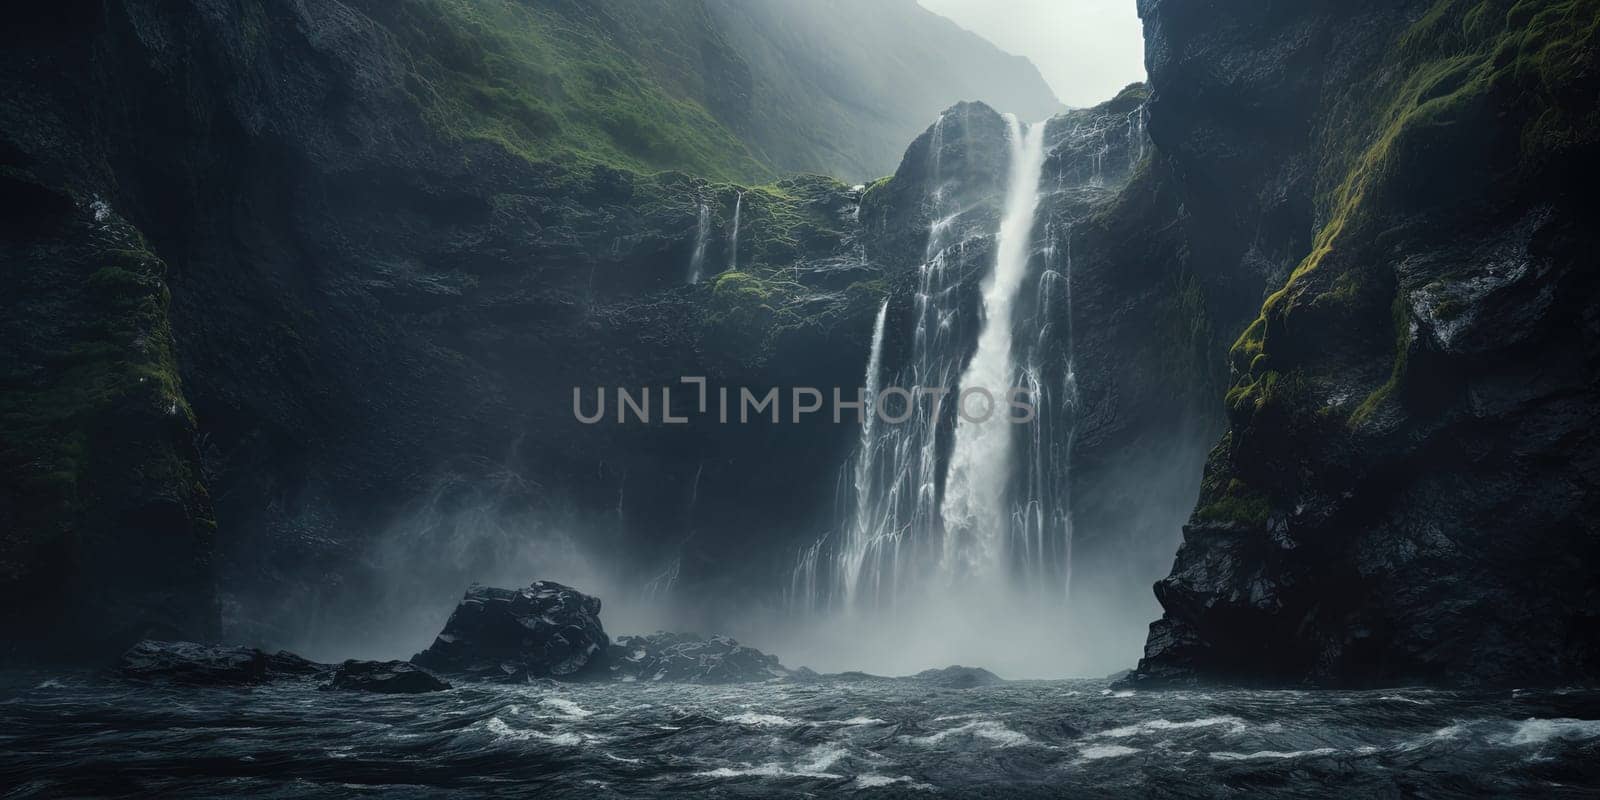 Abyss with a cascading waterfall, captured with stunning realism, the water plummeting into depths